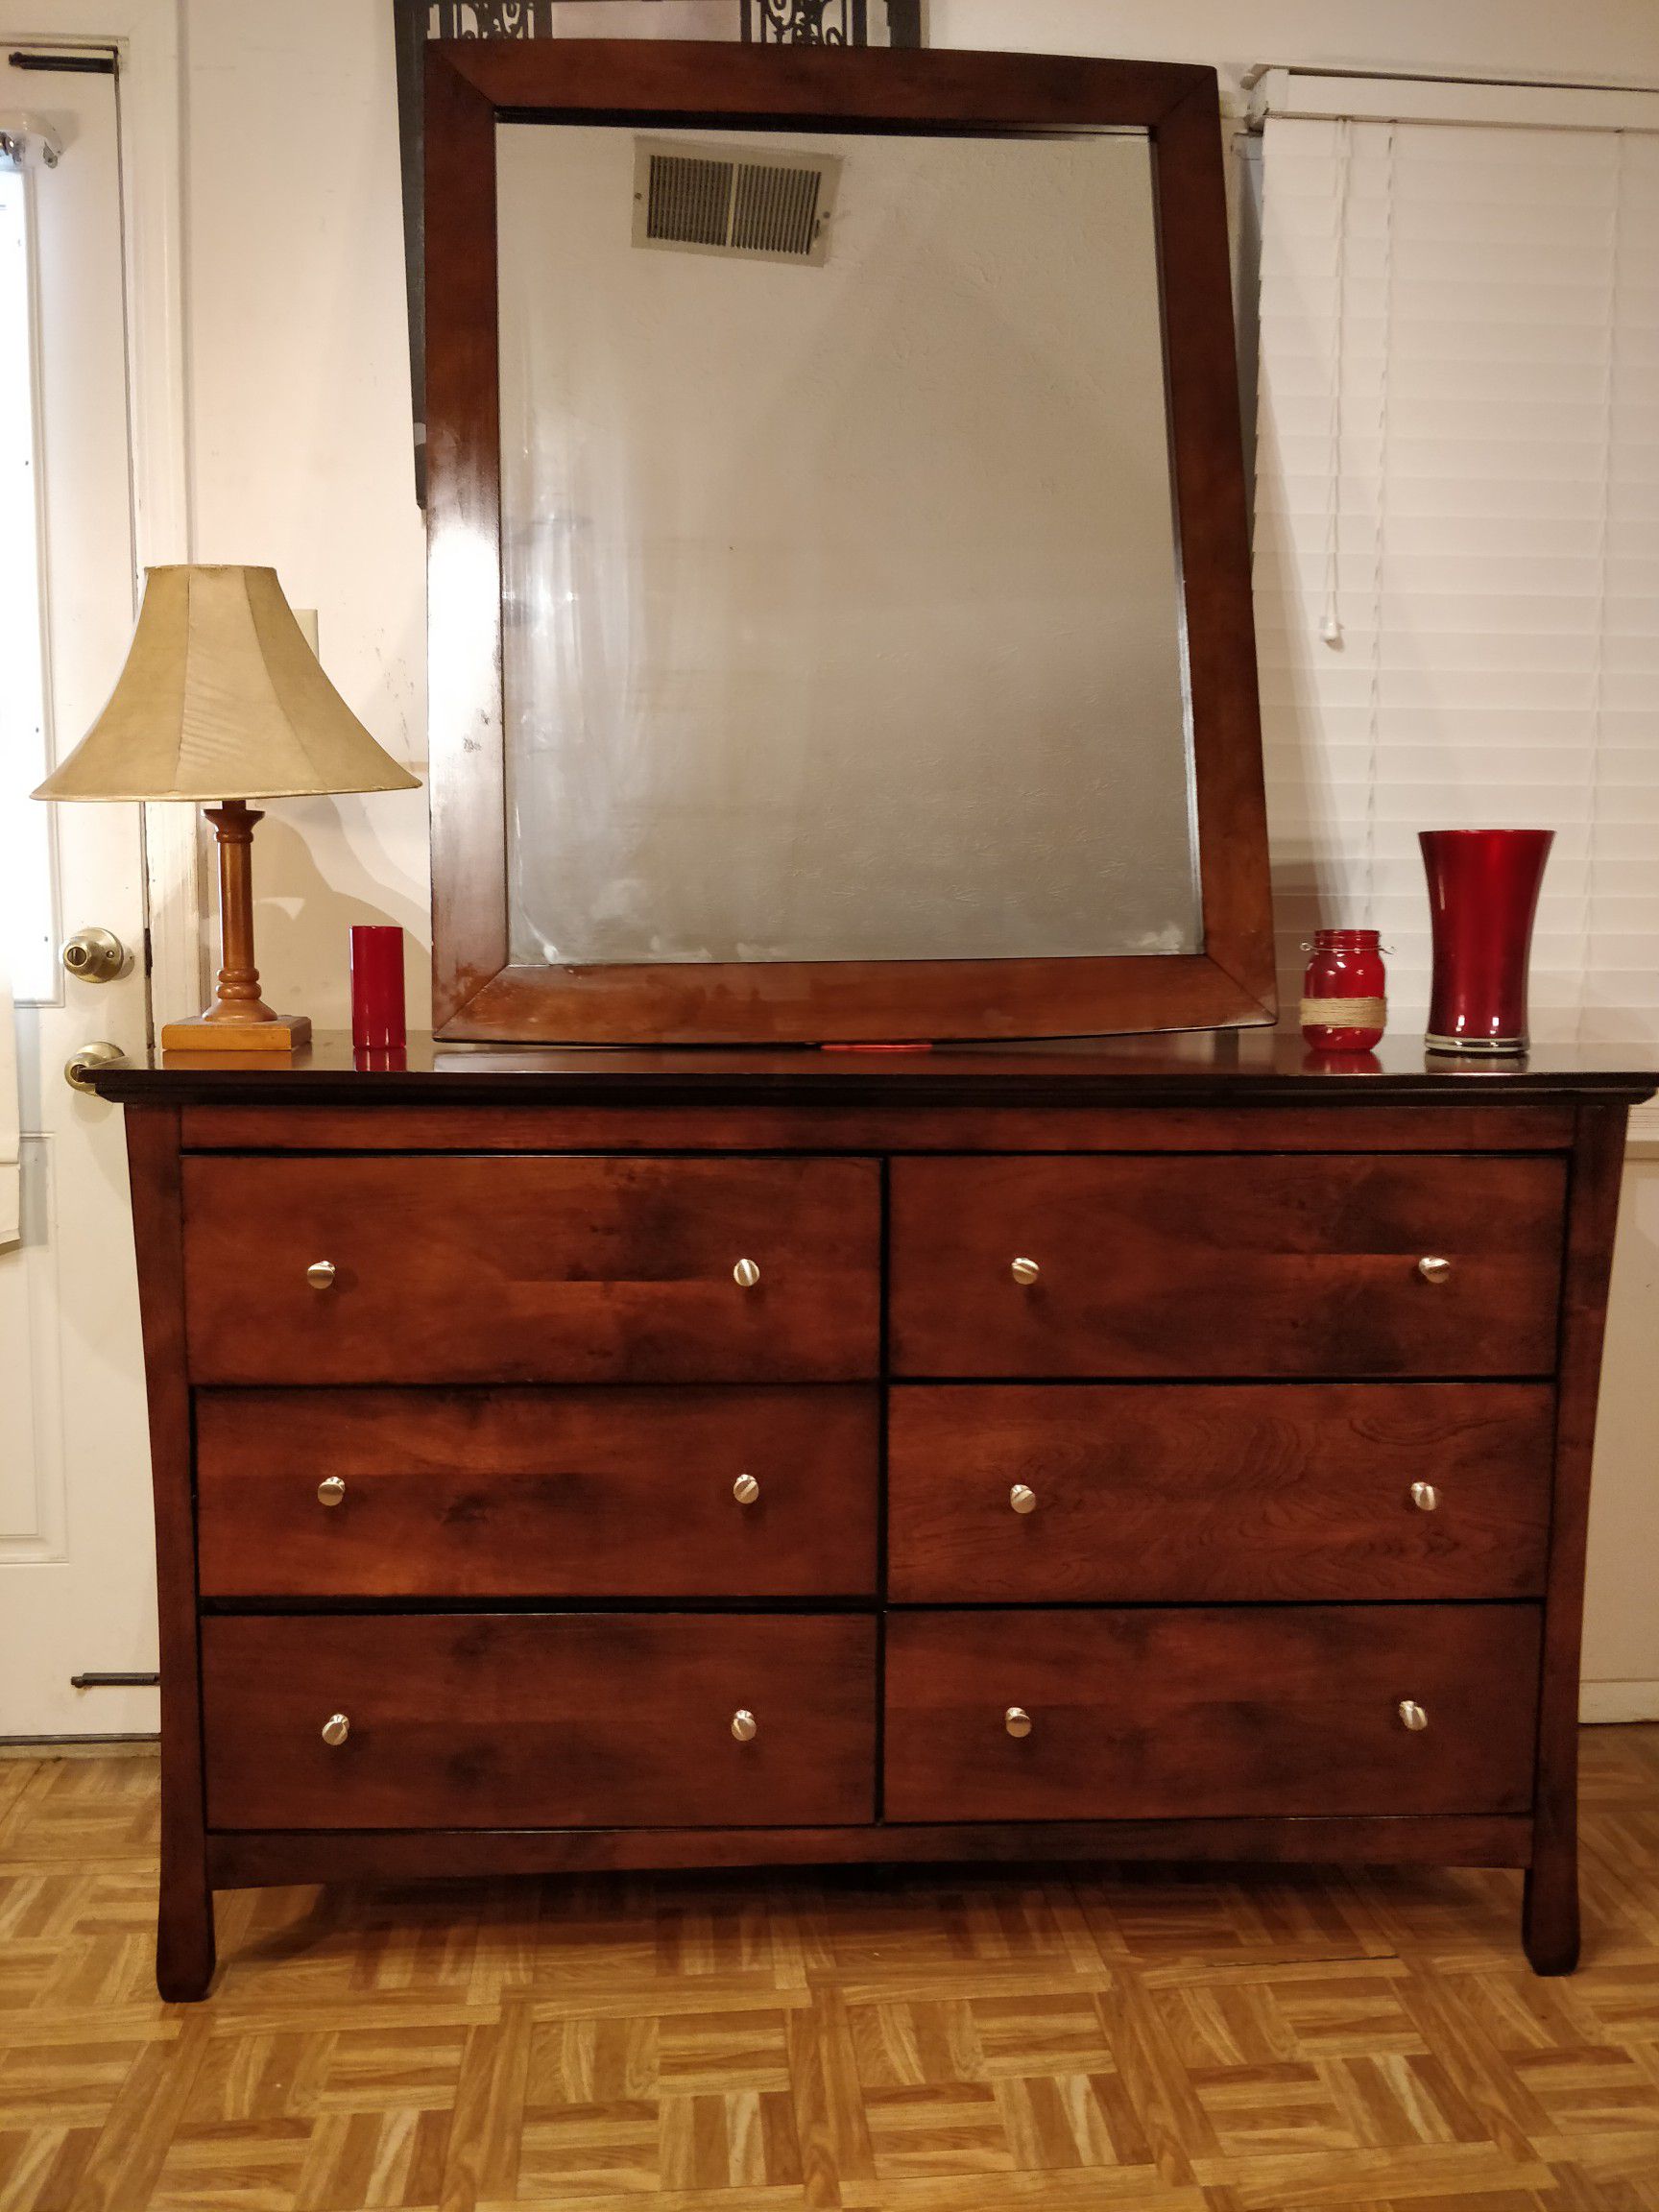 Nice wooden big dresser with big mirror in great condition, all drawers sliding smoothly,